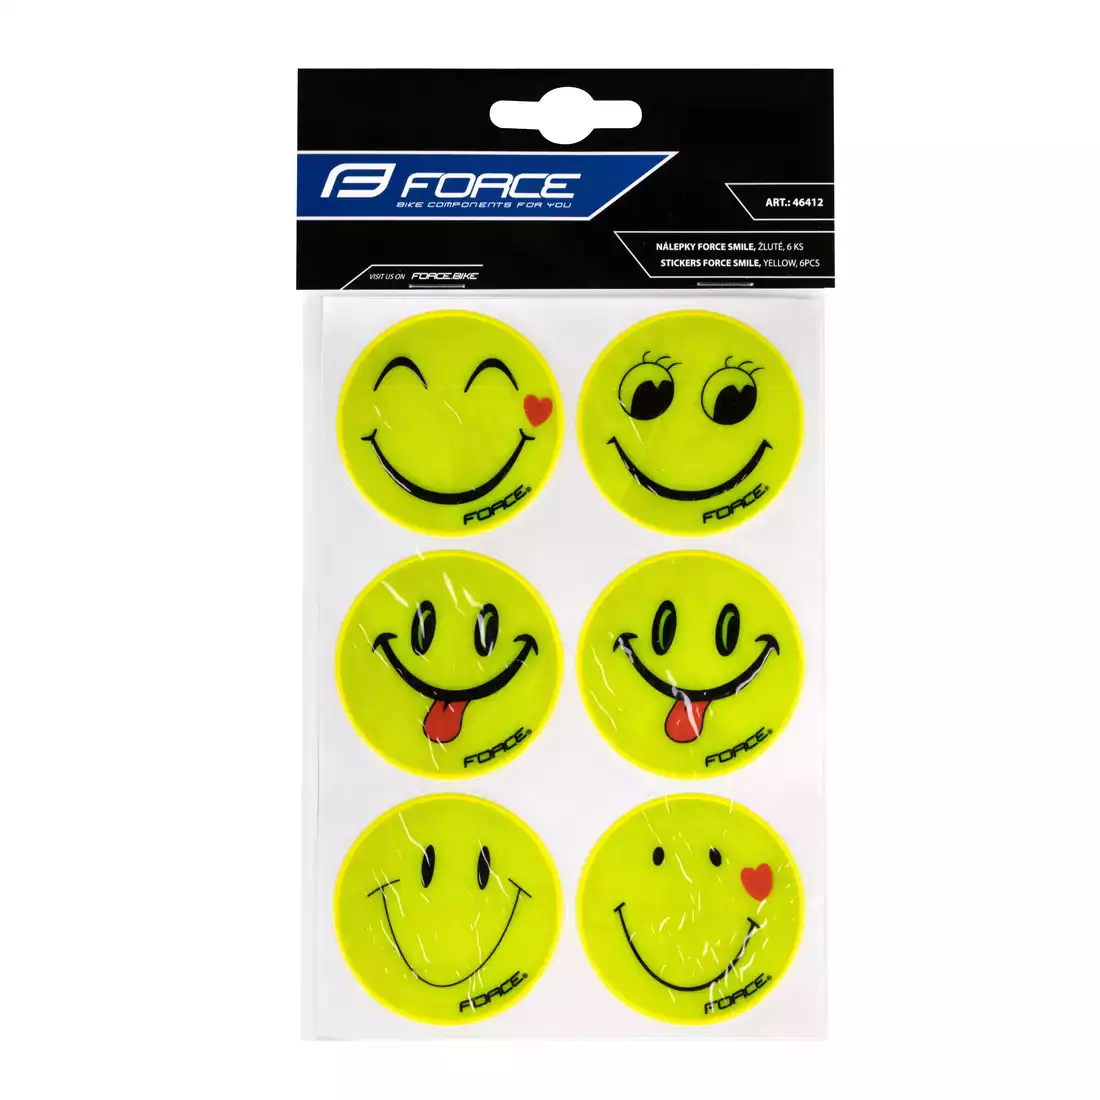 FORCE SMILE Yellow reflective sticker set, fluo